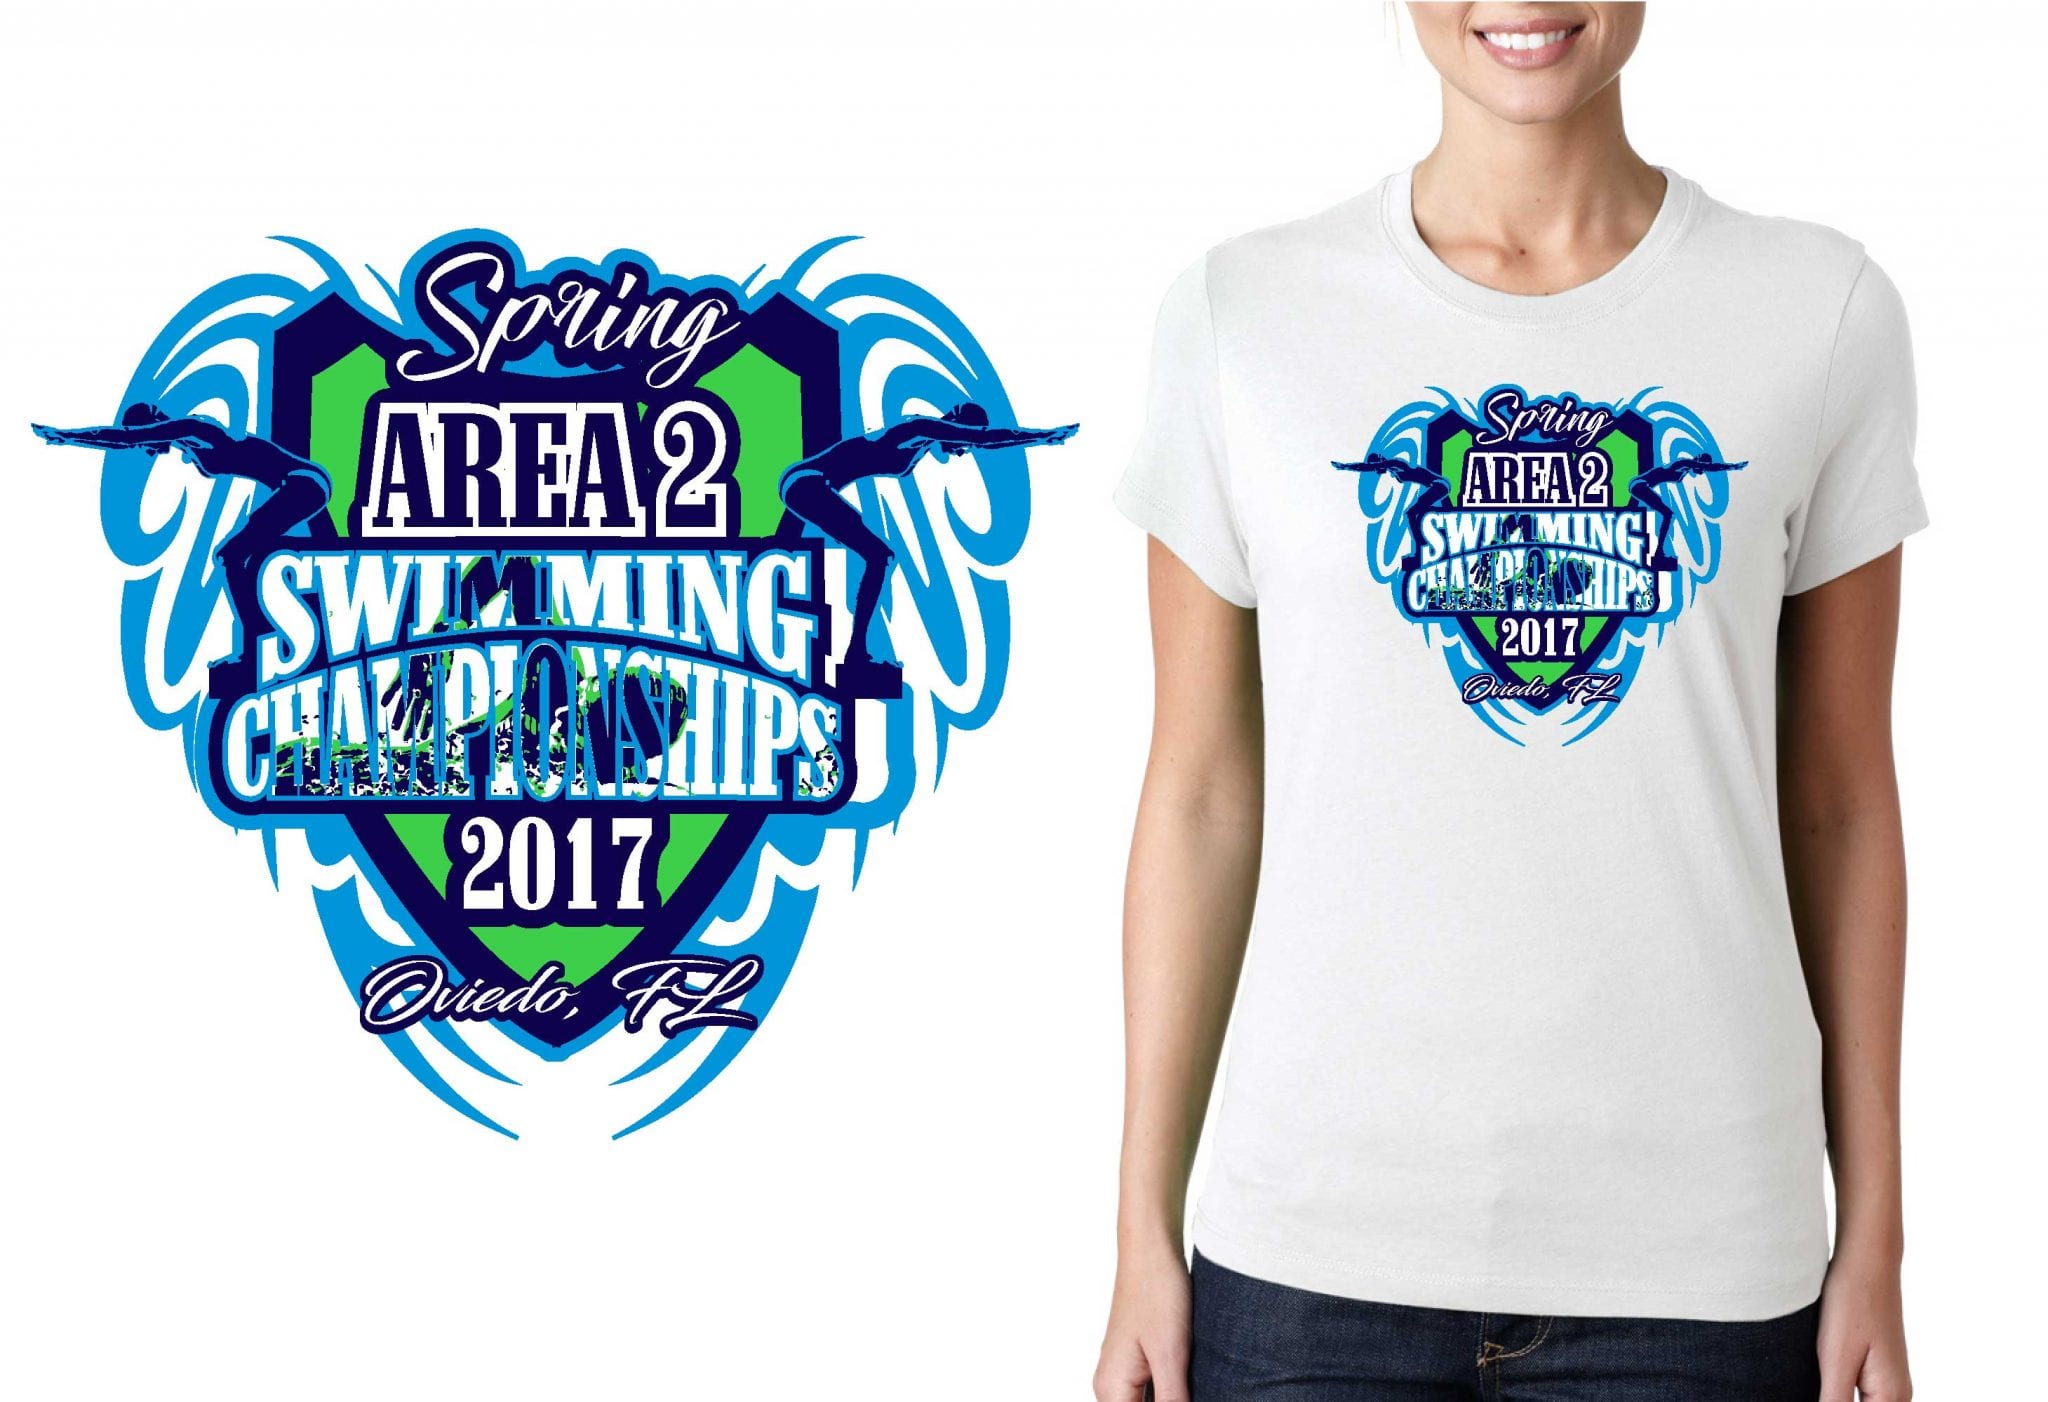 2017 Spring Area 2 Swimming Championships Vector Logo Design For T